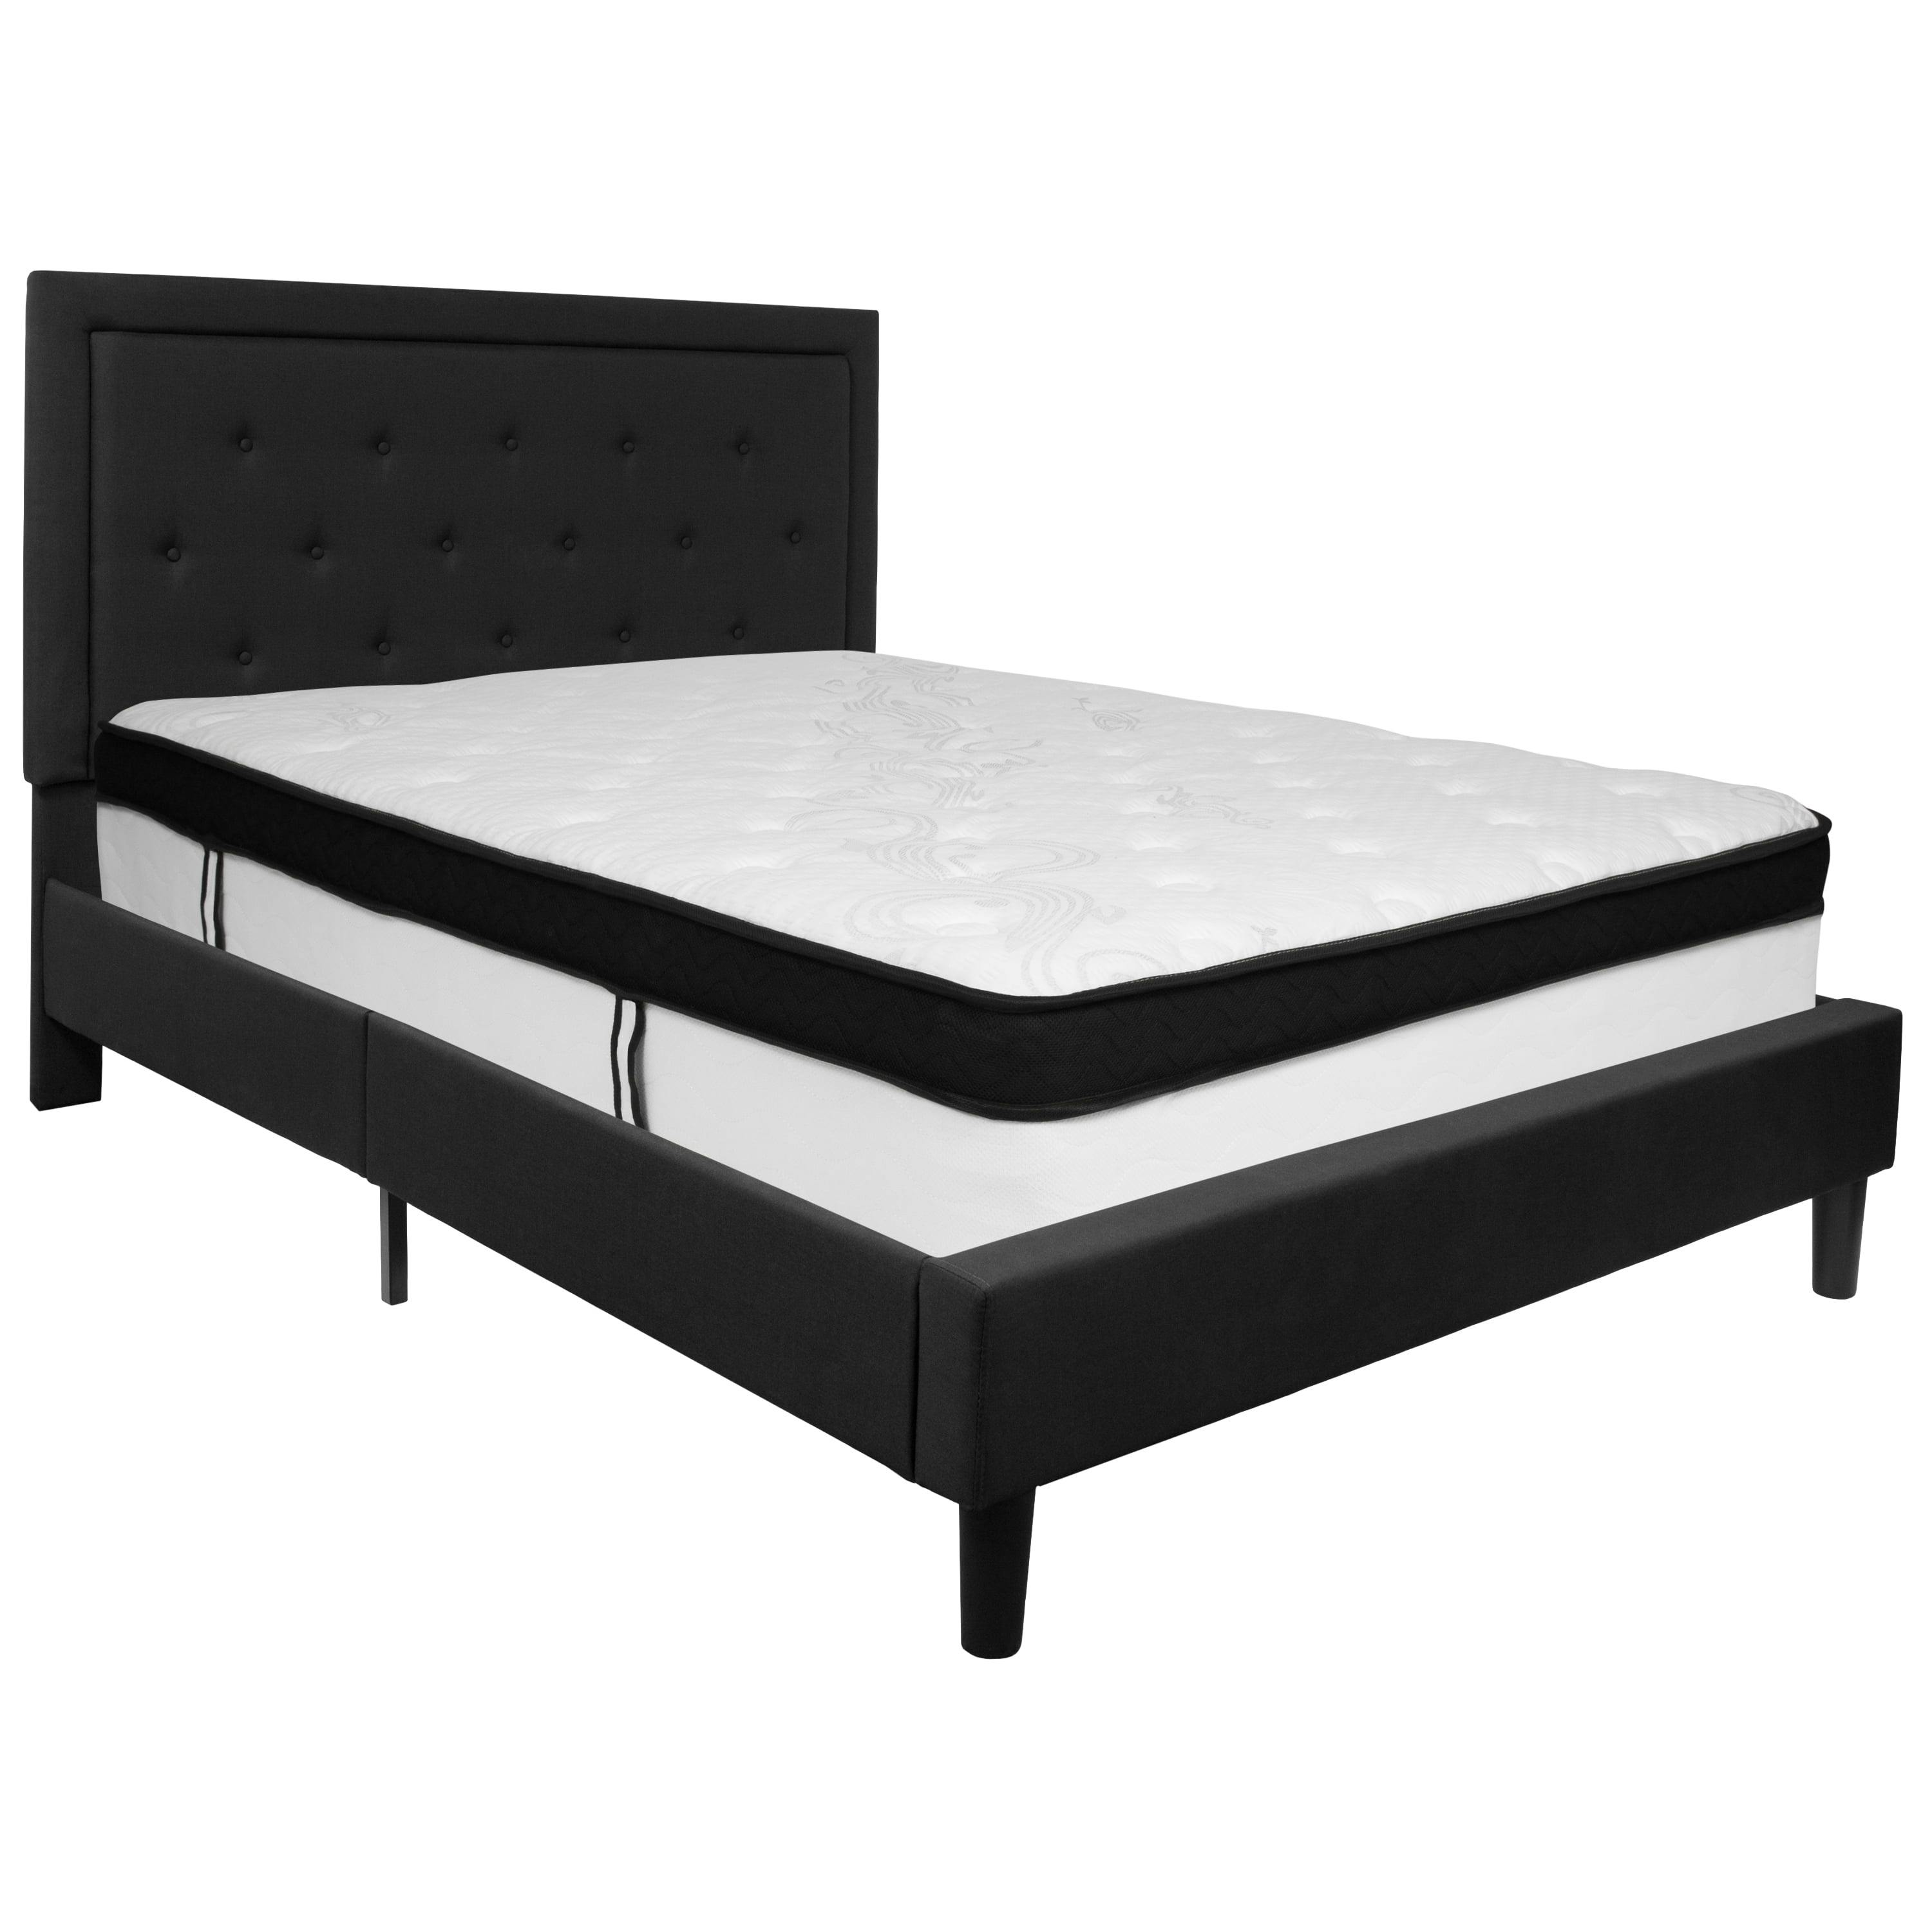 Elegant Queen-Sized Black Fabric Upholstered Platform Bed with Tufted Headboard